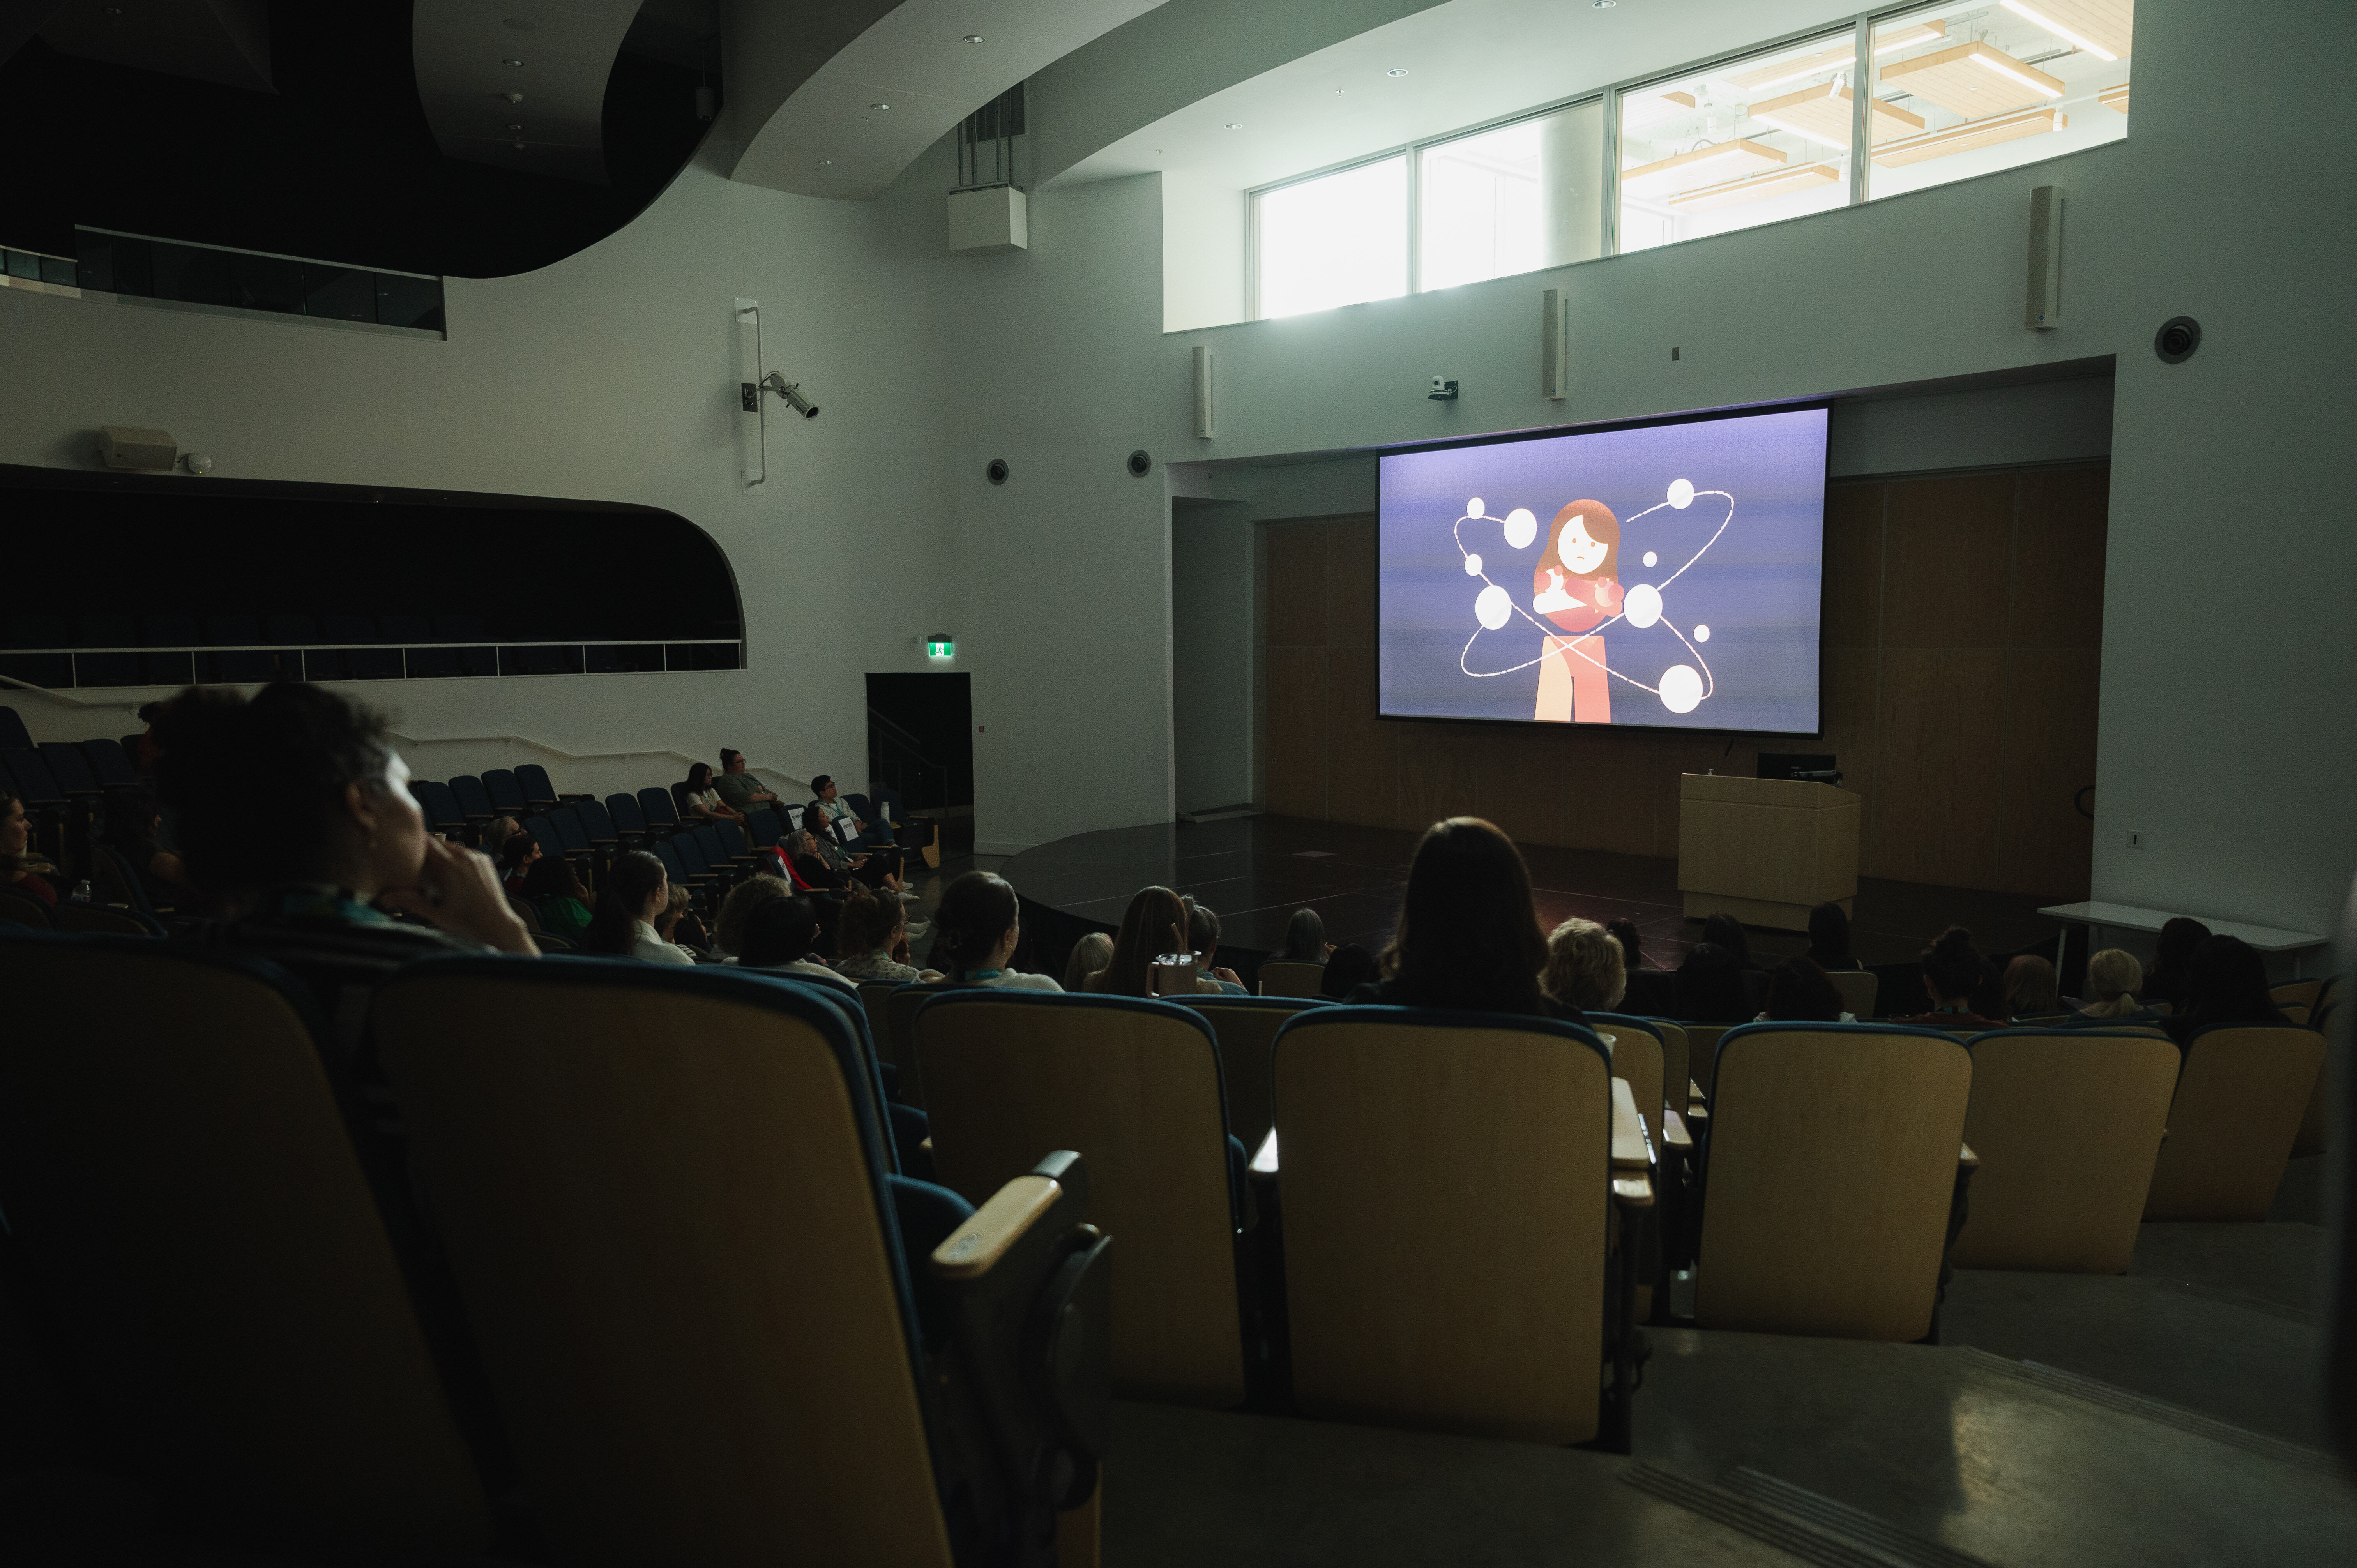 An animated video on a screen being shown to an auditorium of people at the Reliance Theatre